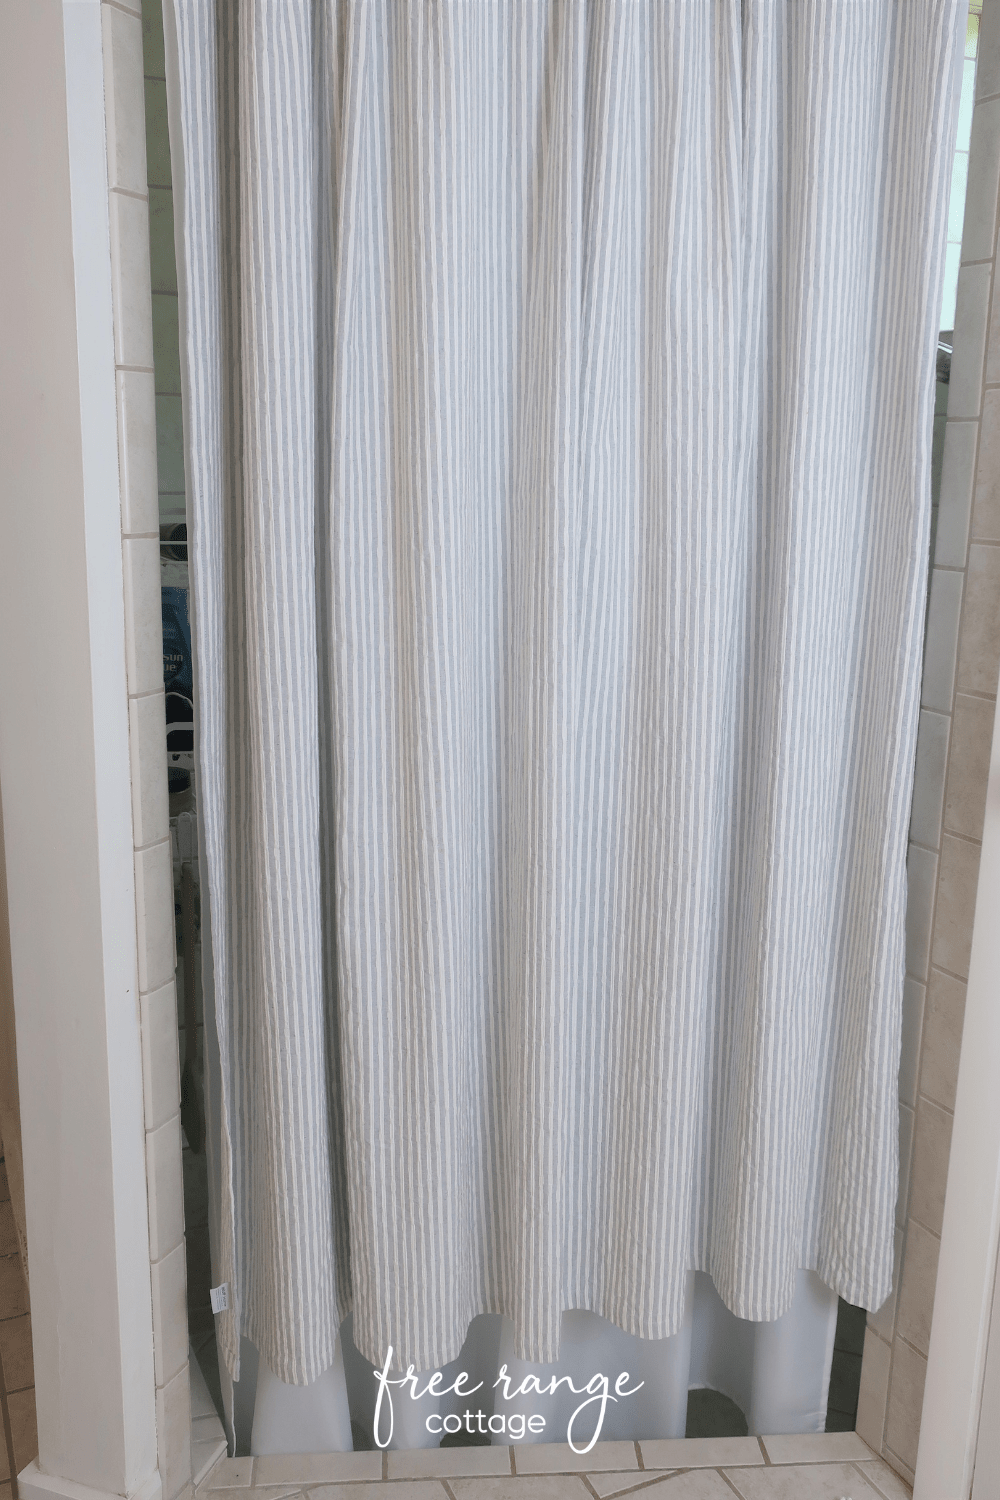 Shower curtain before